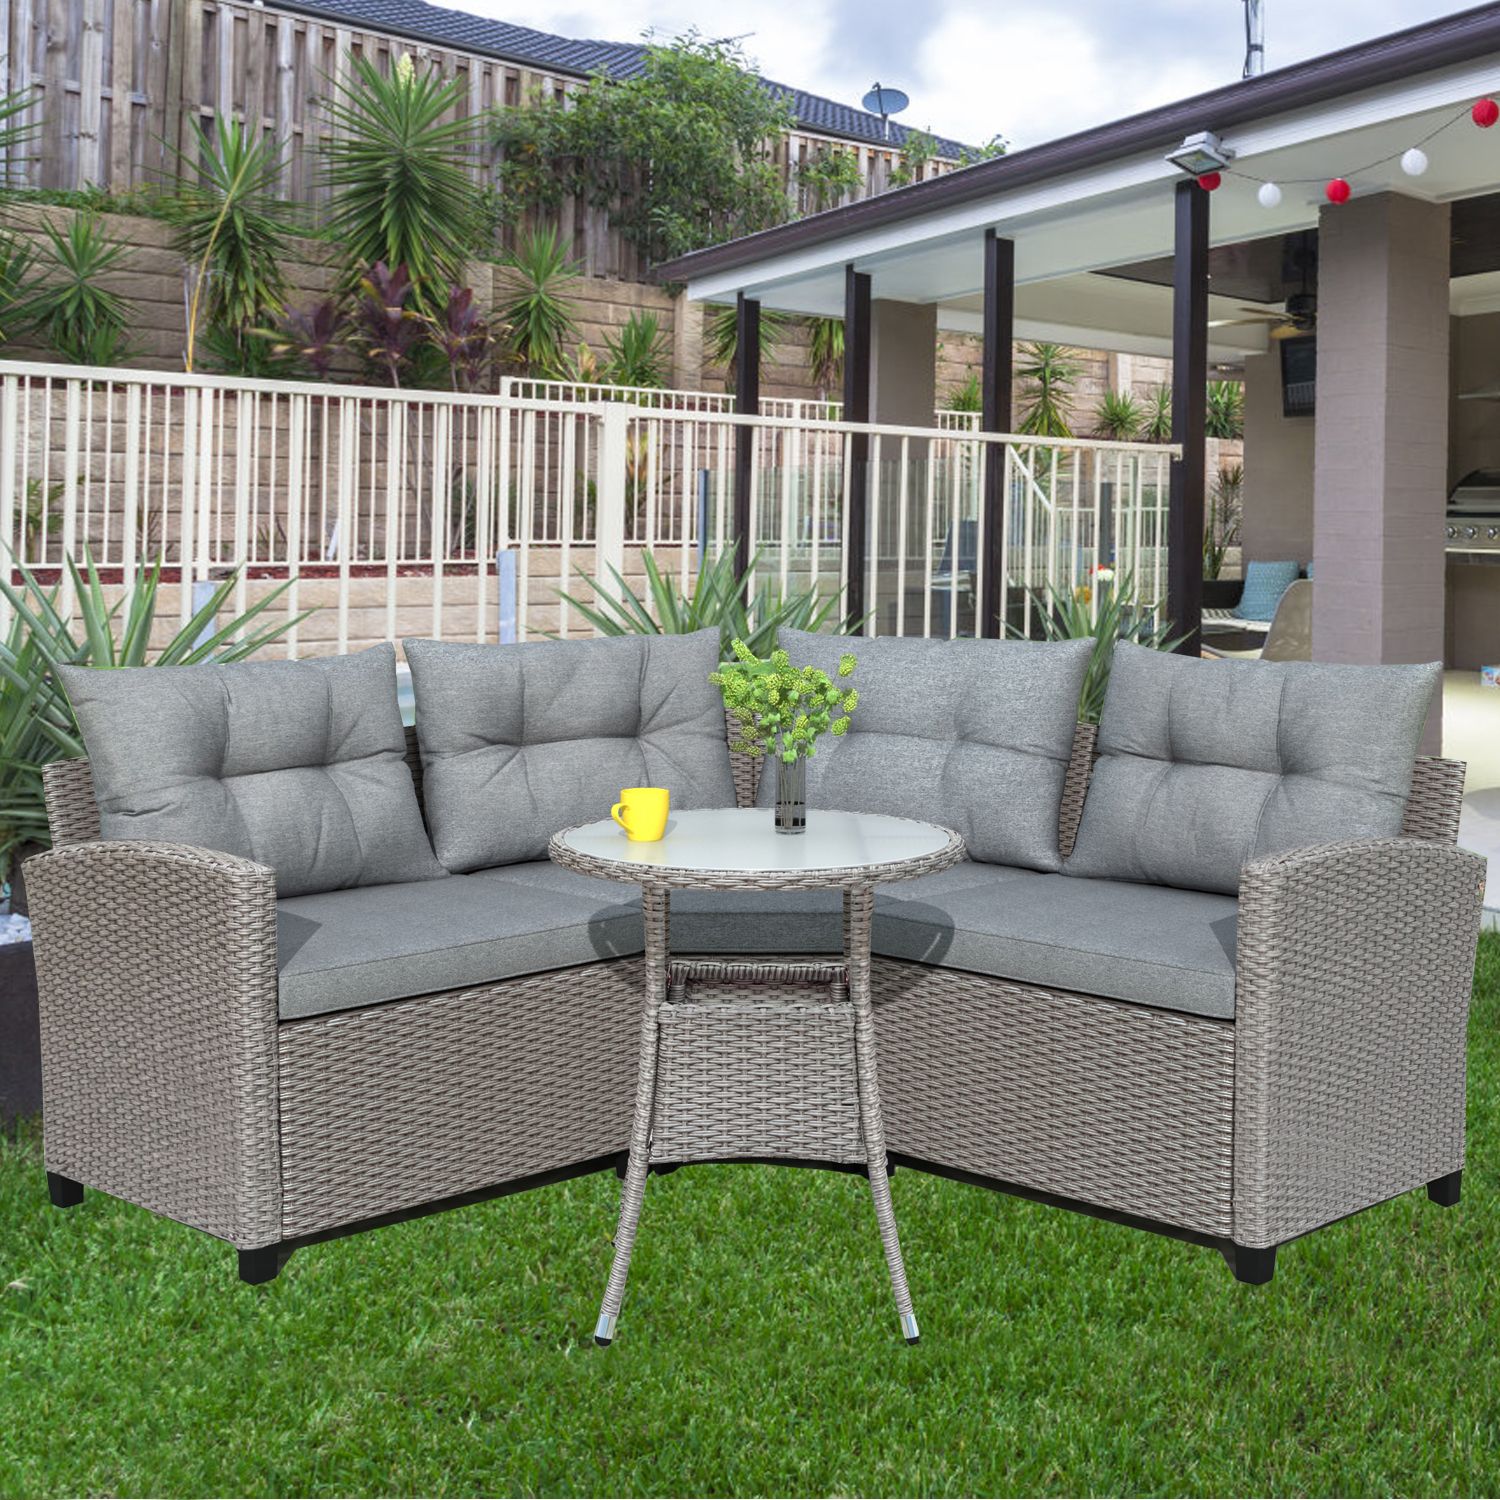 4 Piece Outdoor Patio Sofa Furniture Sets, Gray Rattan Wicker Patio Set With Regard To 4 Piece Outdoor Sectional Patio Sets (View 1 of 15)